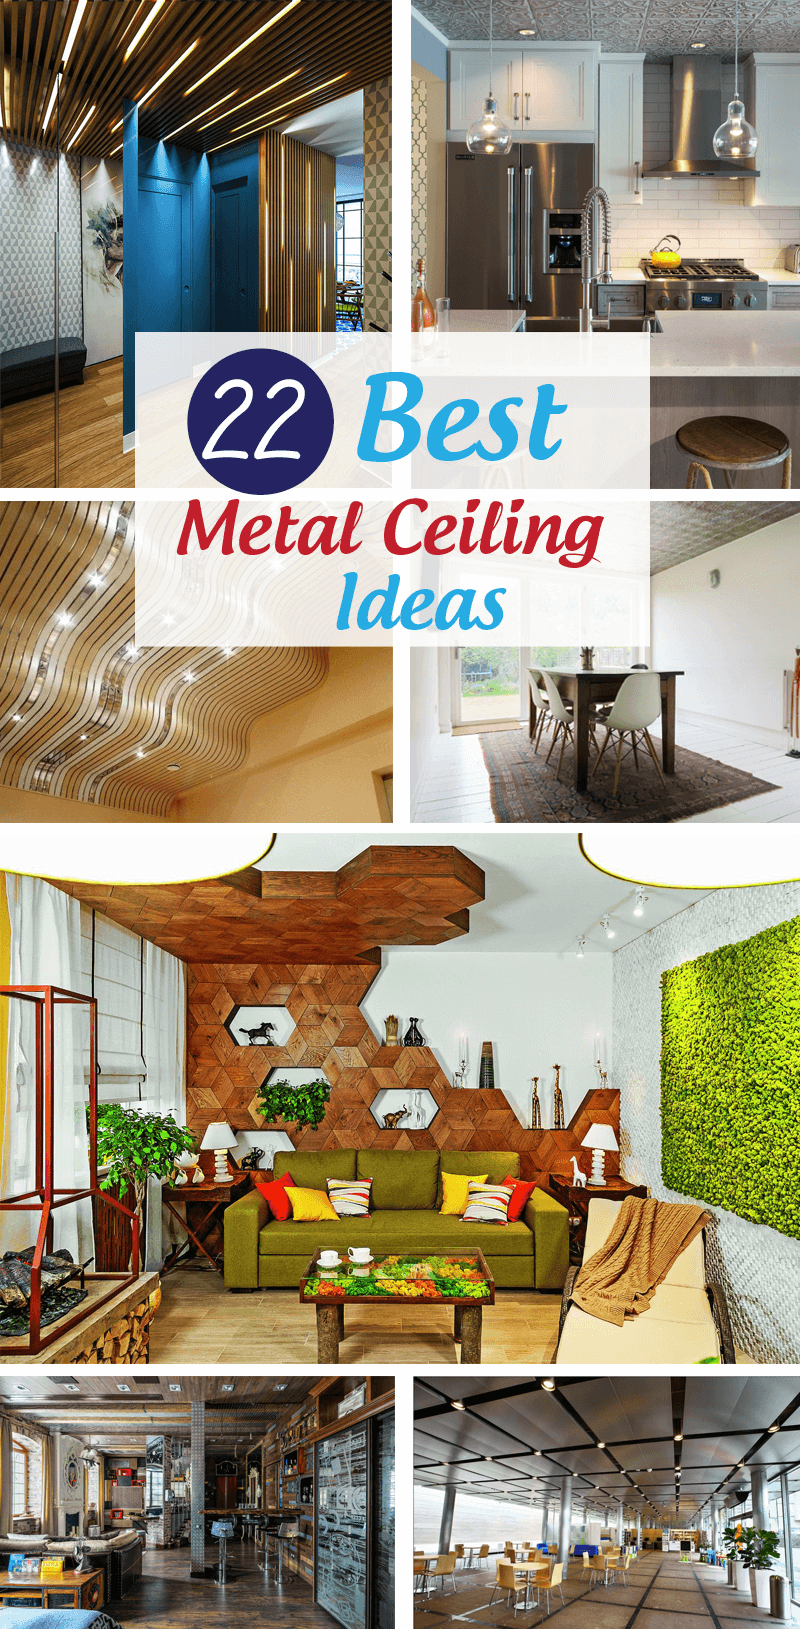 22 Best Metal Ceiling Ideas To Improve Your Home Ceiling